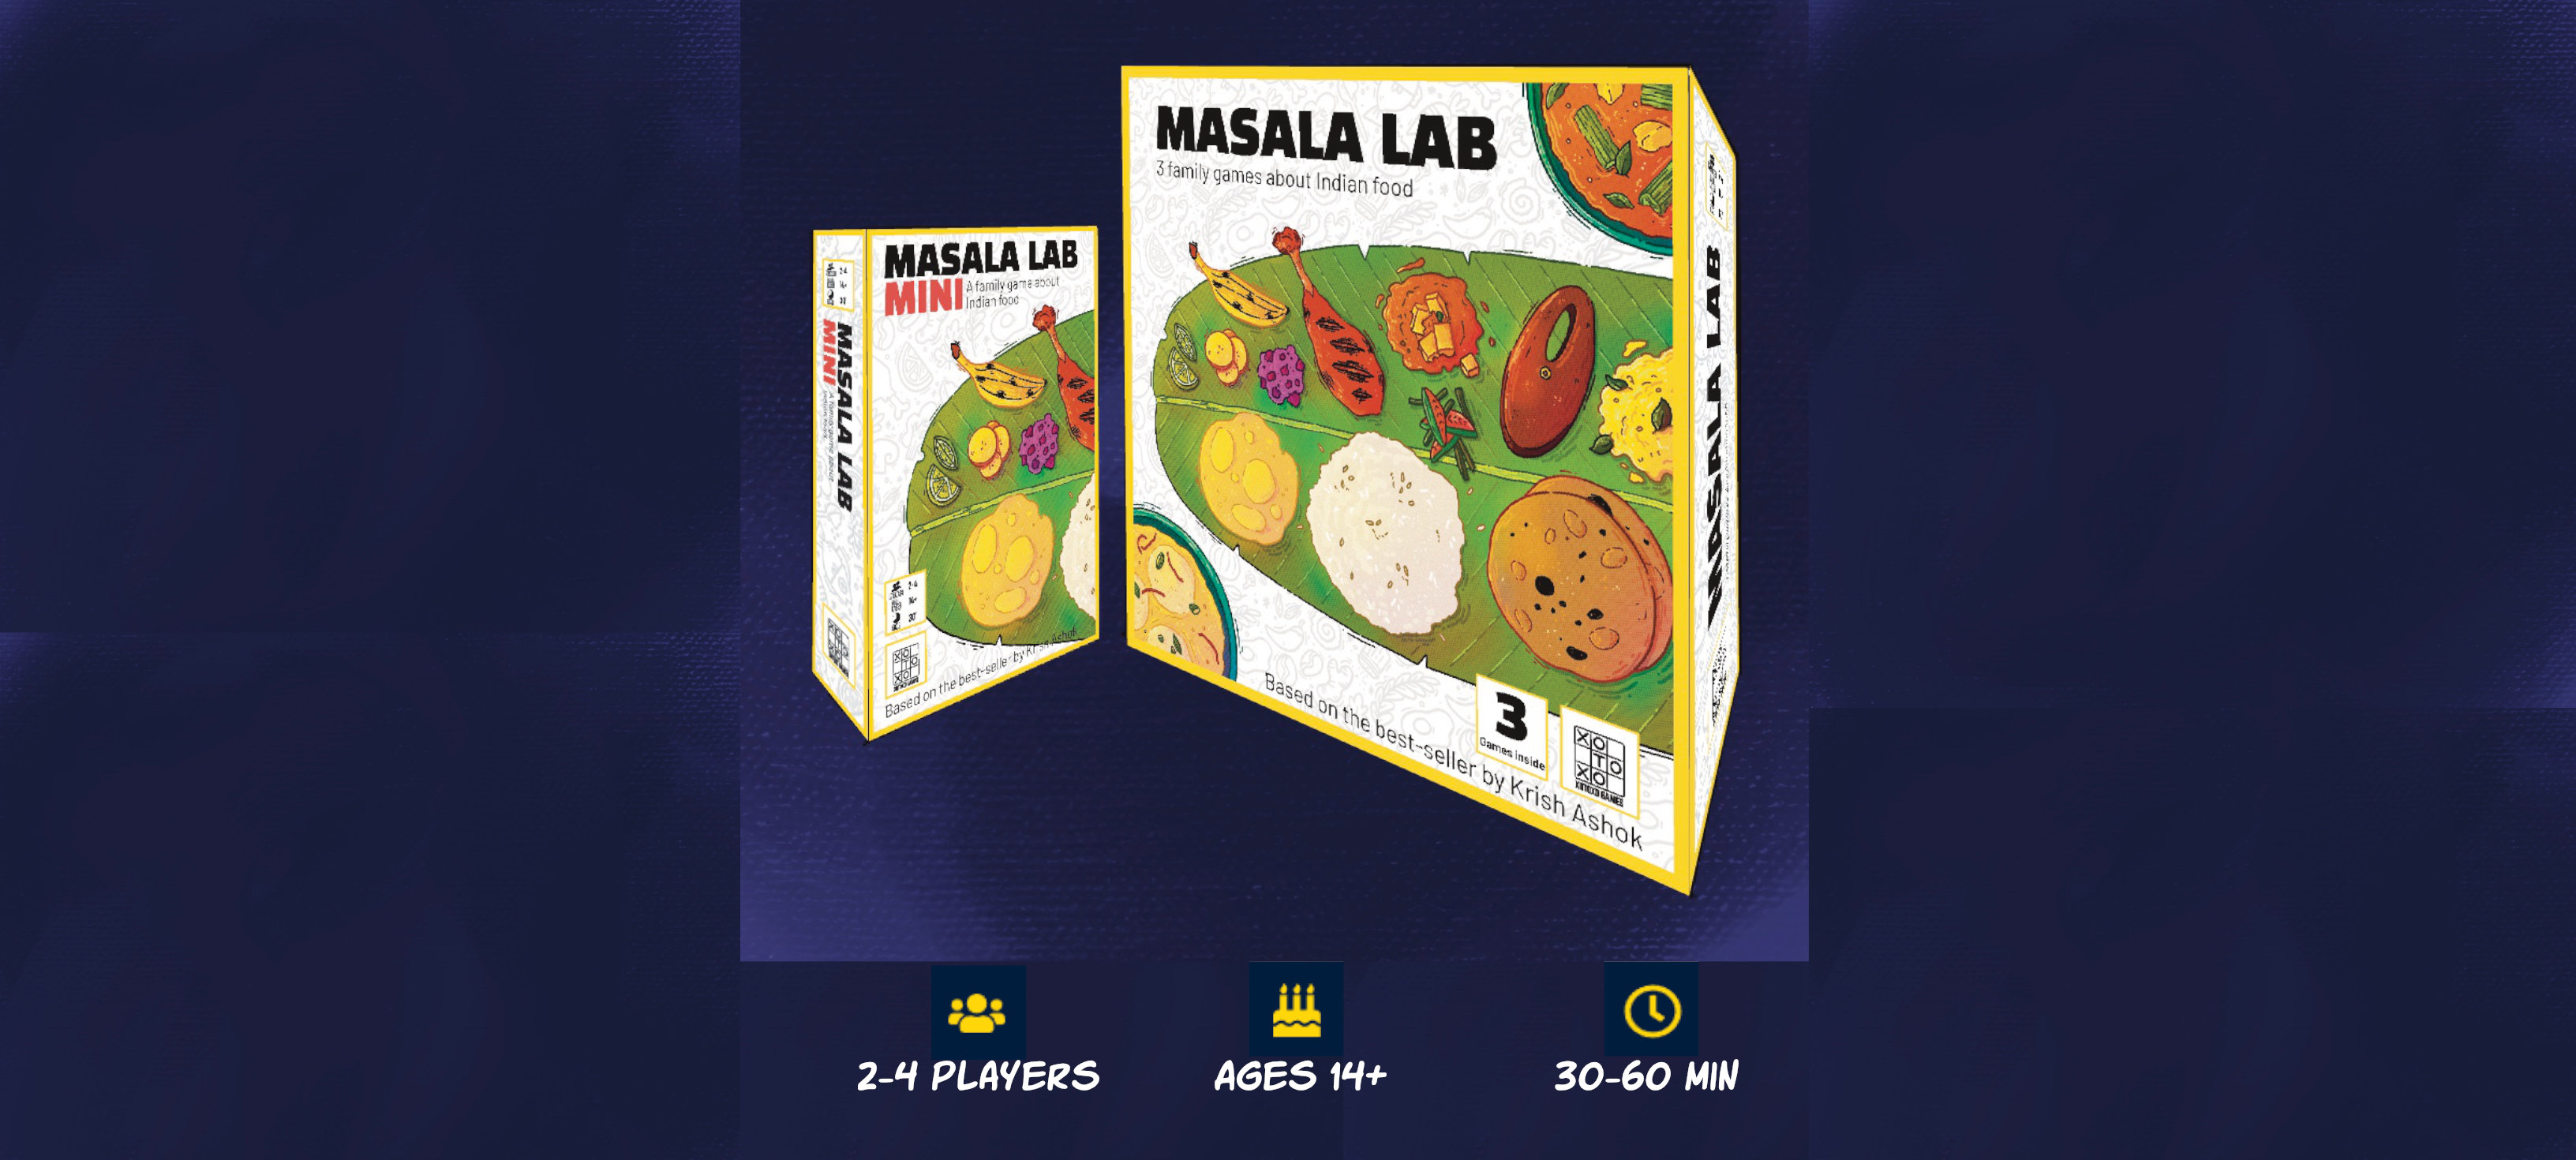 Boxes of the boardgame Masala Lab placed at angles facing each other on a navy blue background